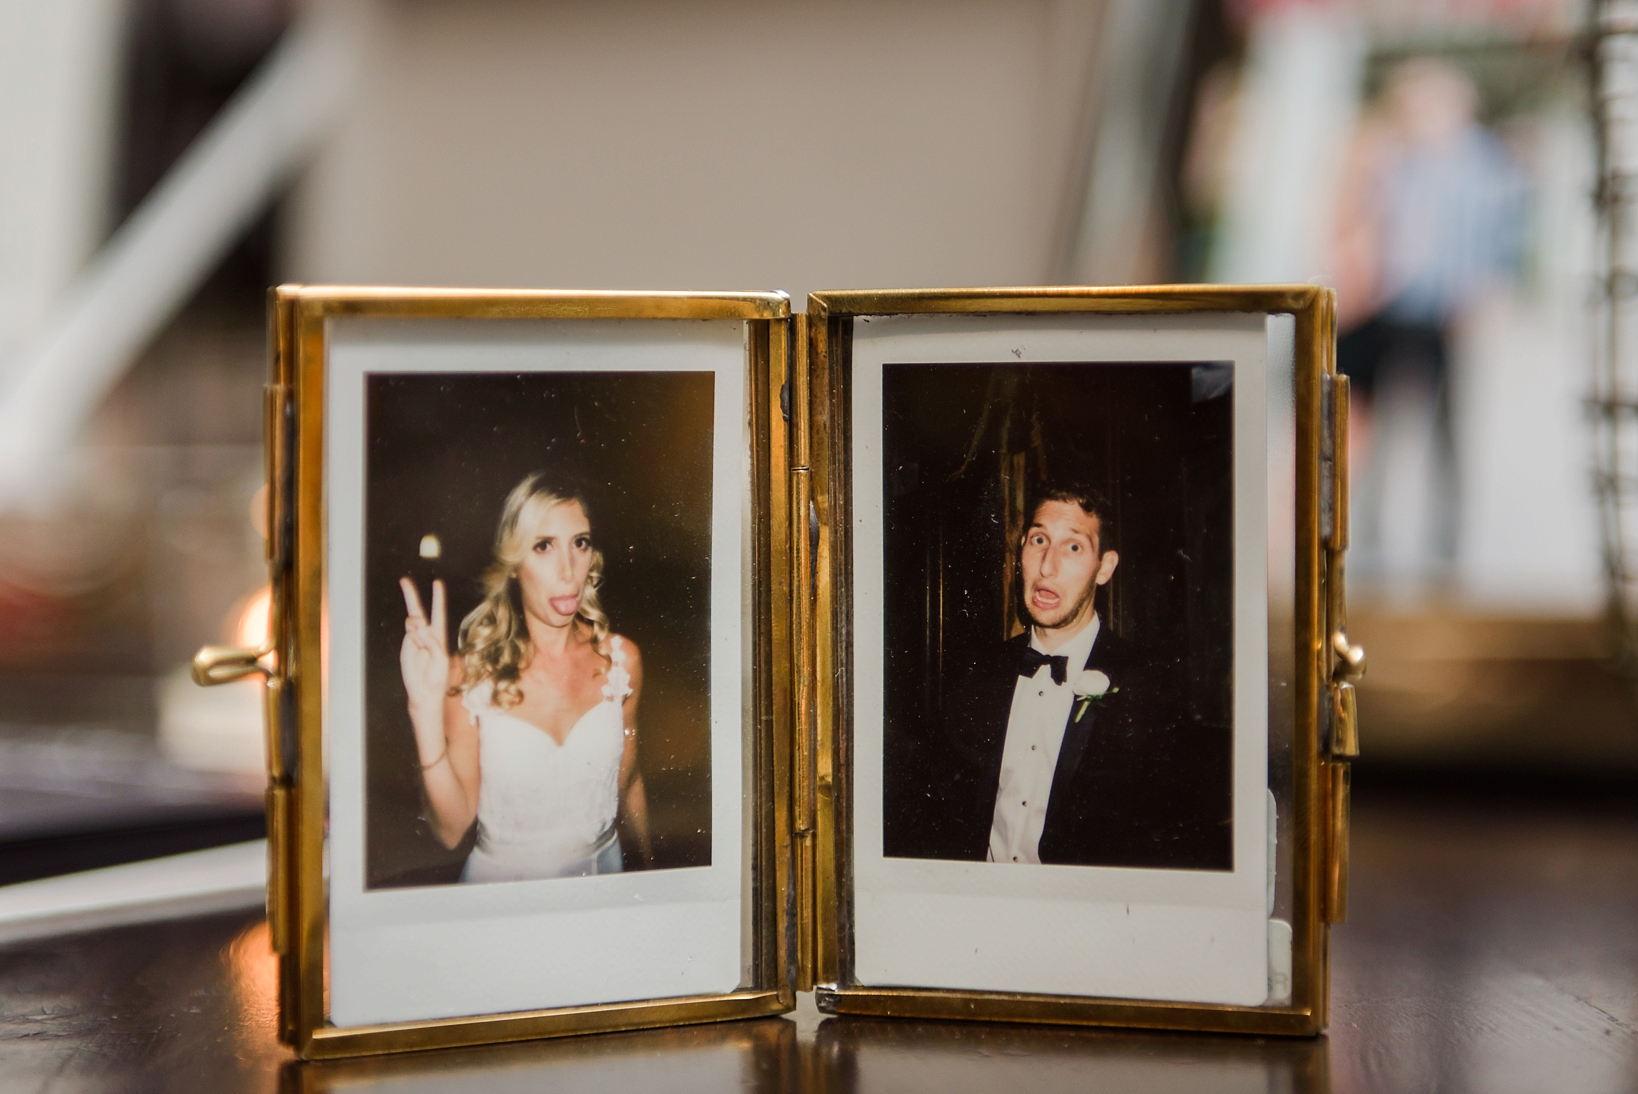 Bride and Groom making silly faces in polaroid pictures being held in a gold frame